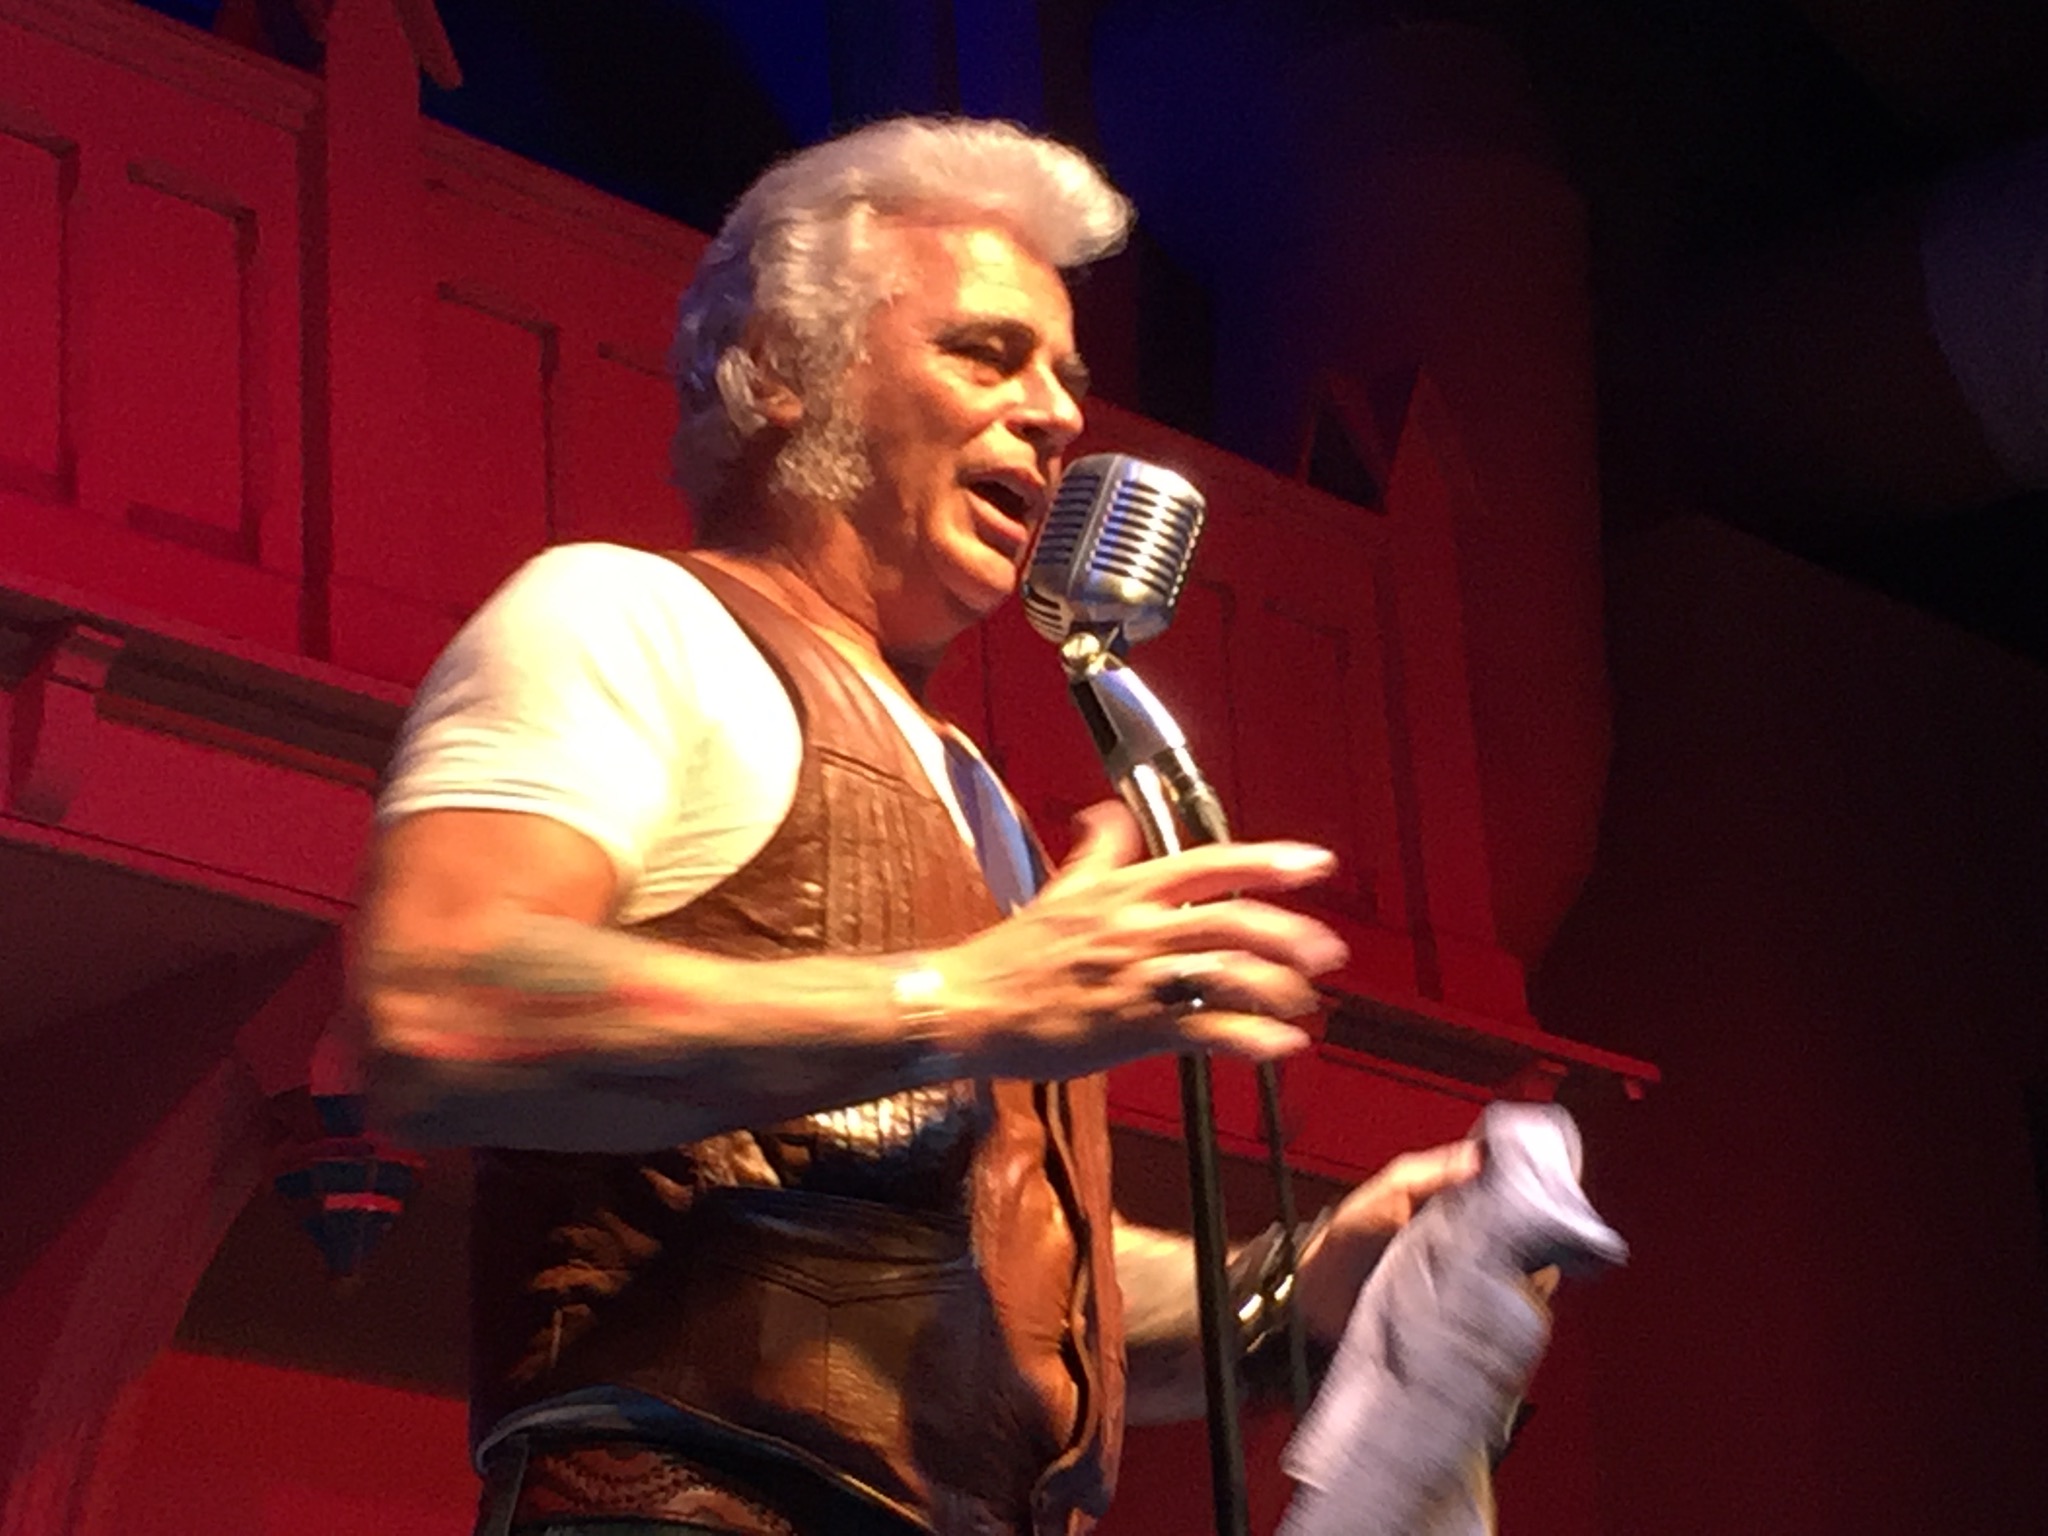 Dale Watson concluding a night of music and bingo at Southgate House Revival&#039;s "Sanctuary." Photo taken by and the property of FourWalls.